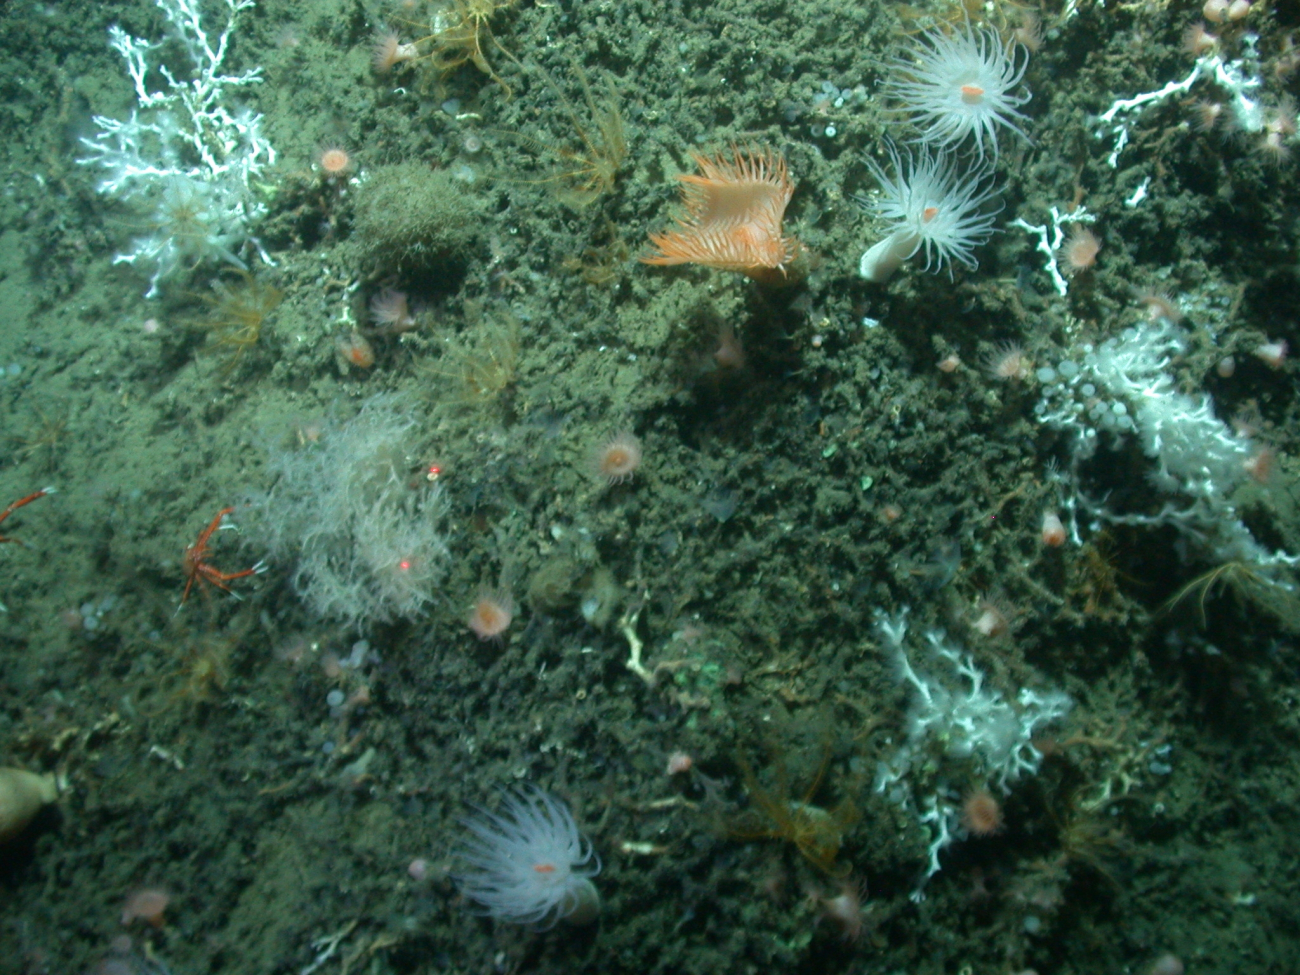 A diverse scene of a venus flytrap anemone, large white anemones, small peach-colored anemones, yellow brown crinoids, white lophelia pertusa coral, asmall black coral bush (with laser dots targeting it), small sponges, and asquat lobster